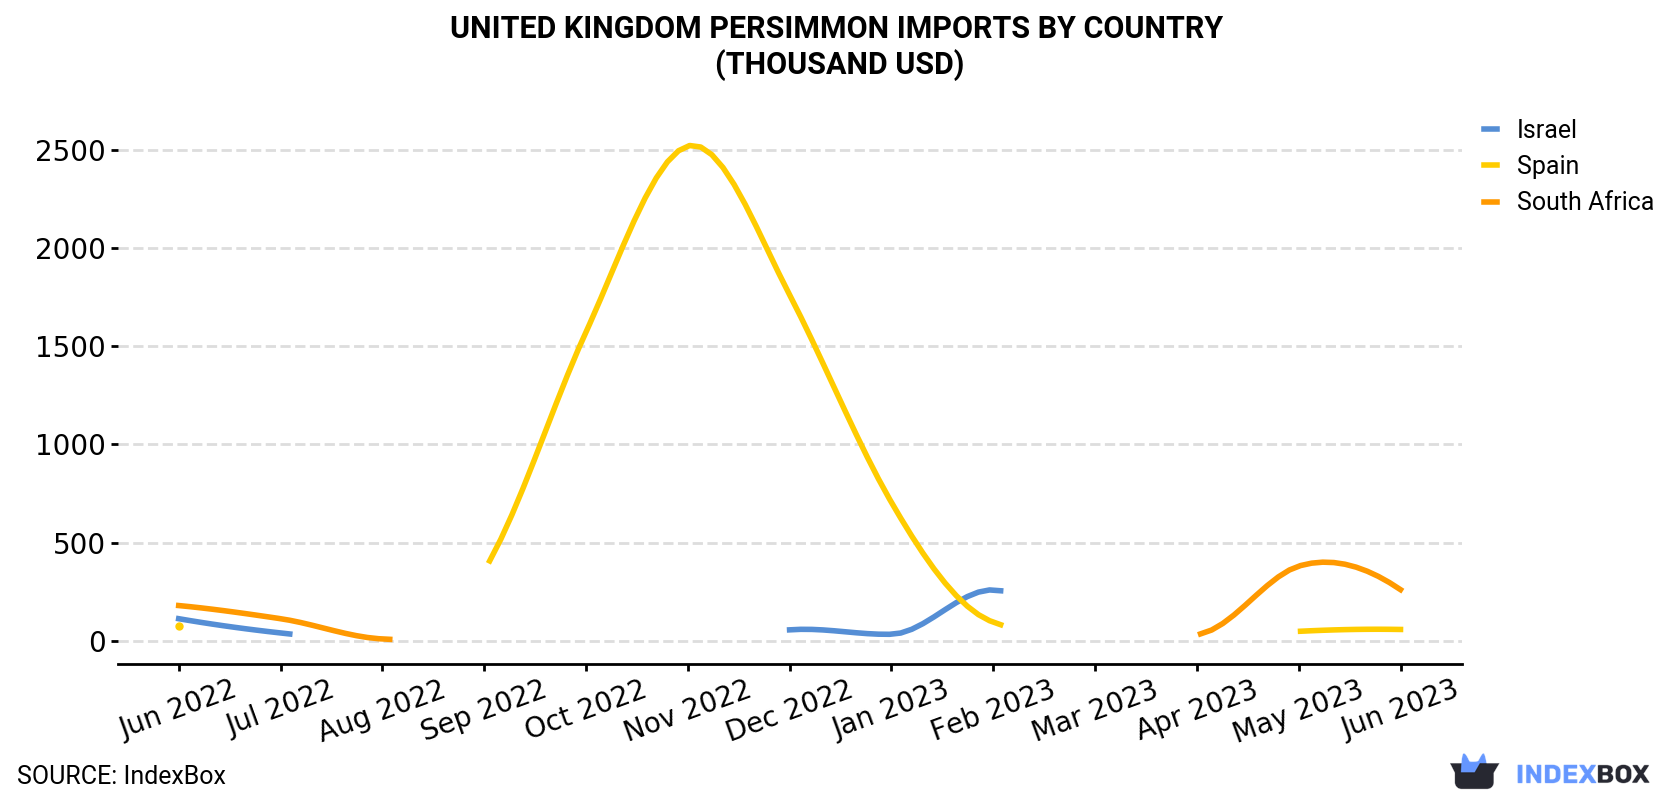 United Kingdom Persimmon Imports By Country (Thousand USD)